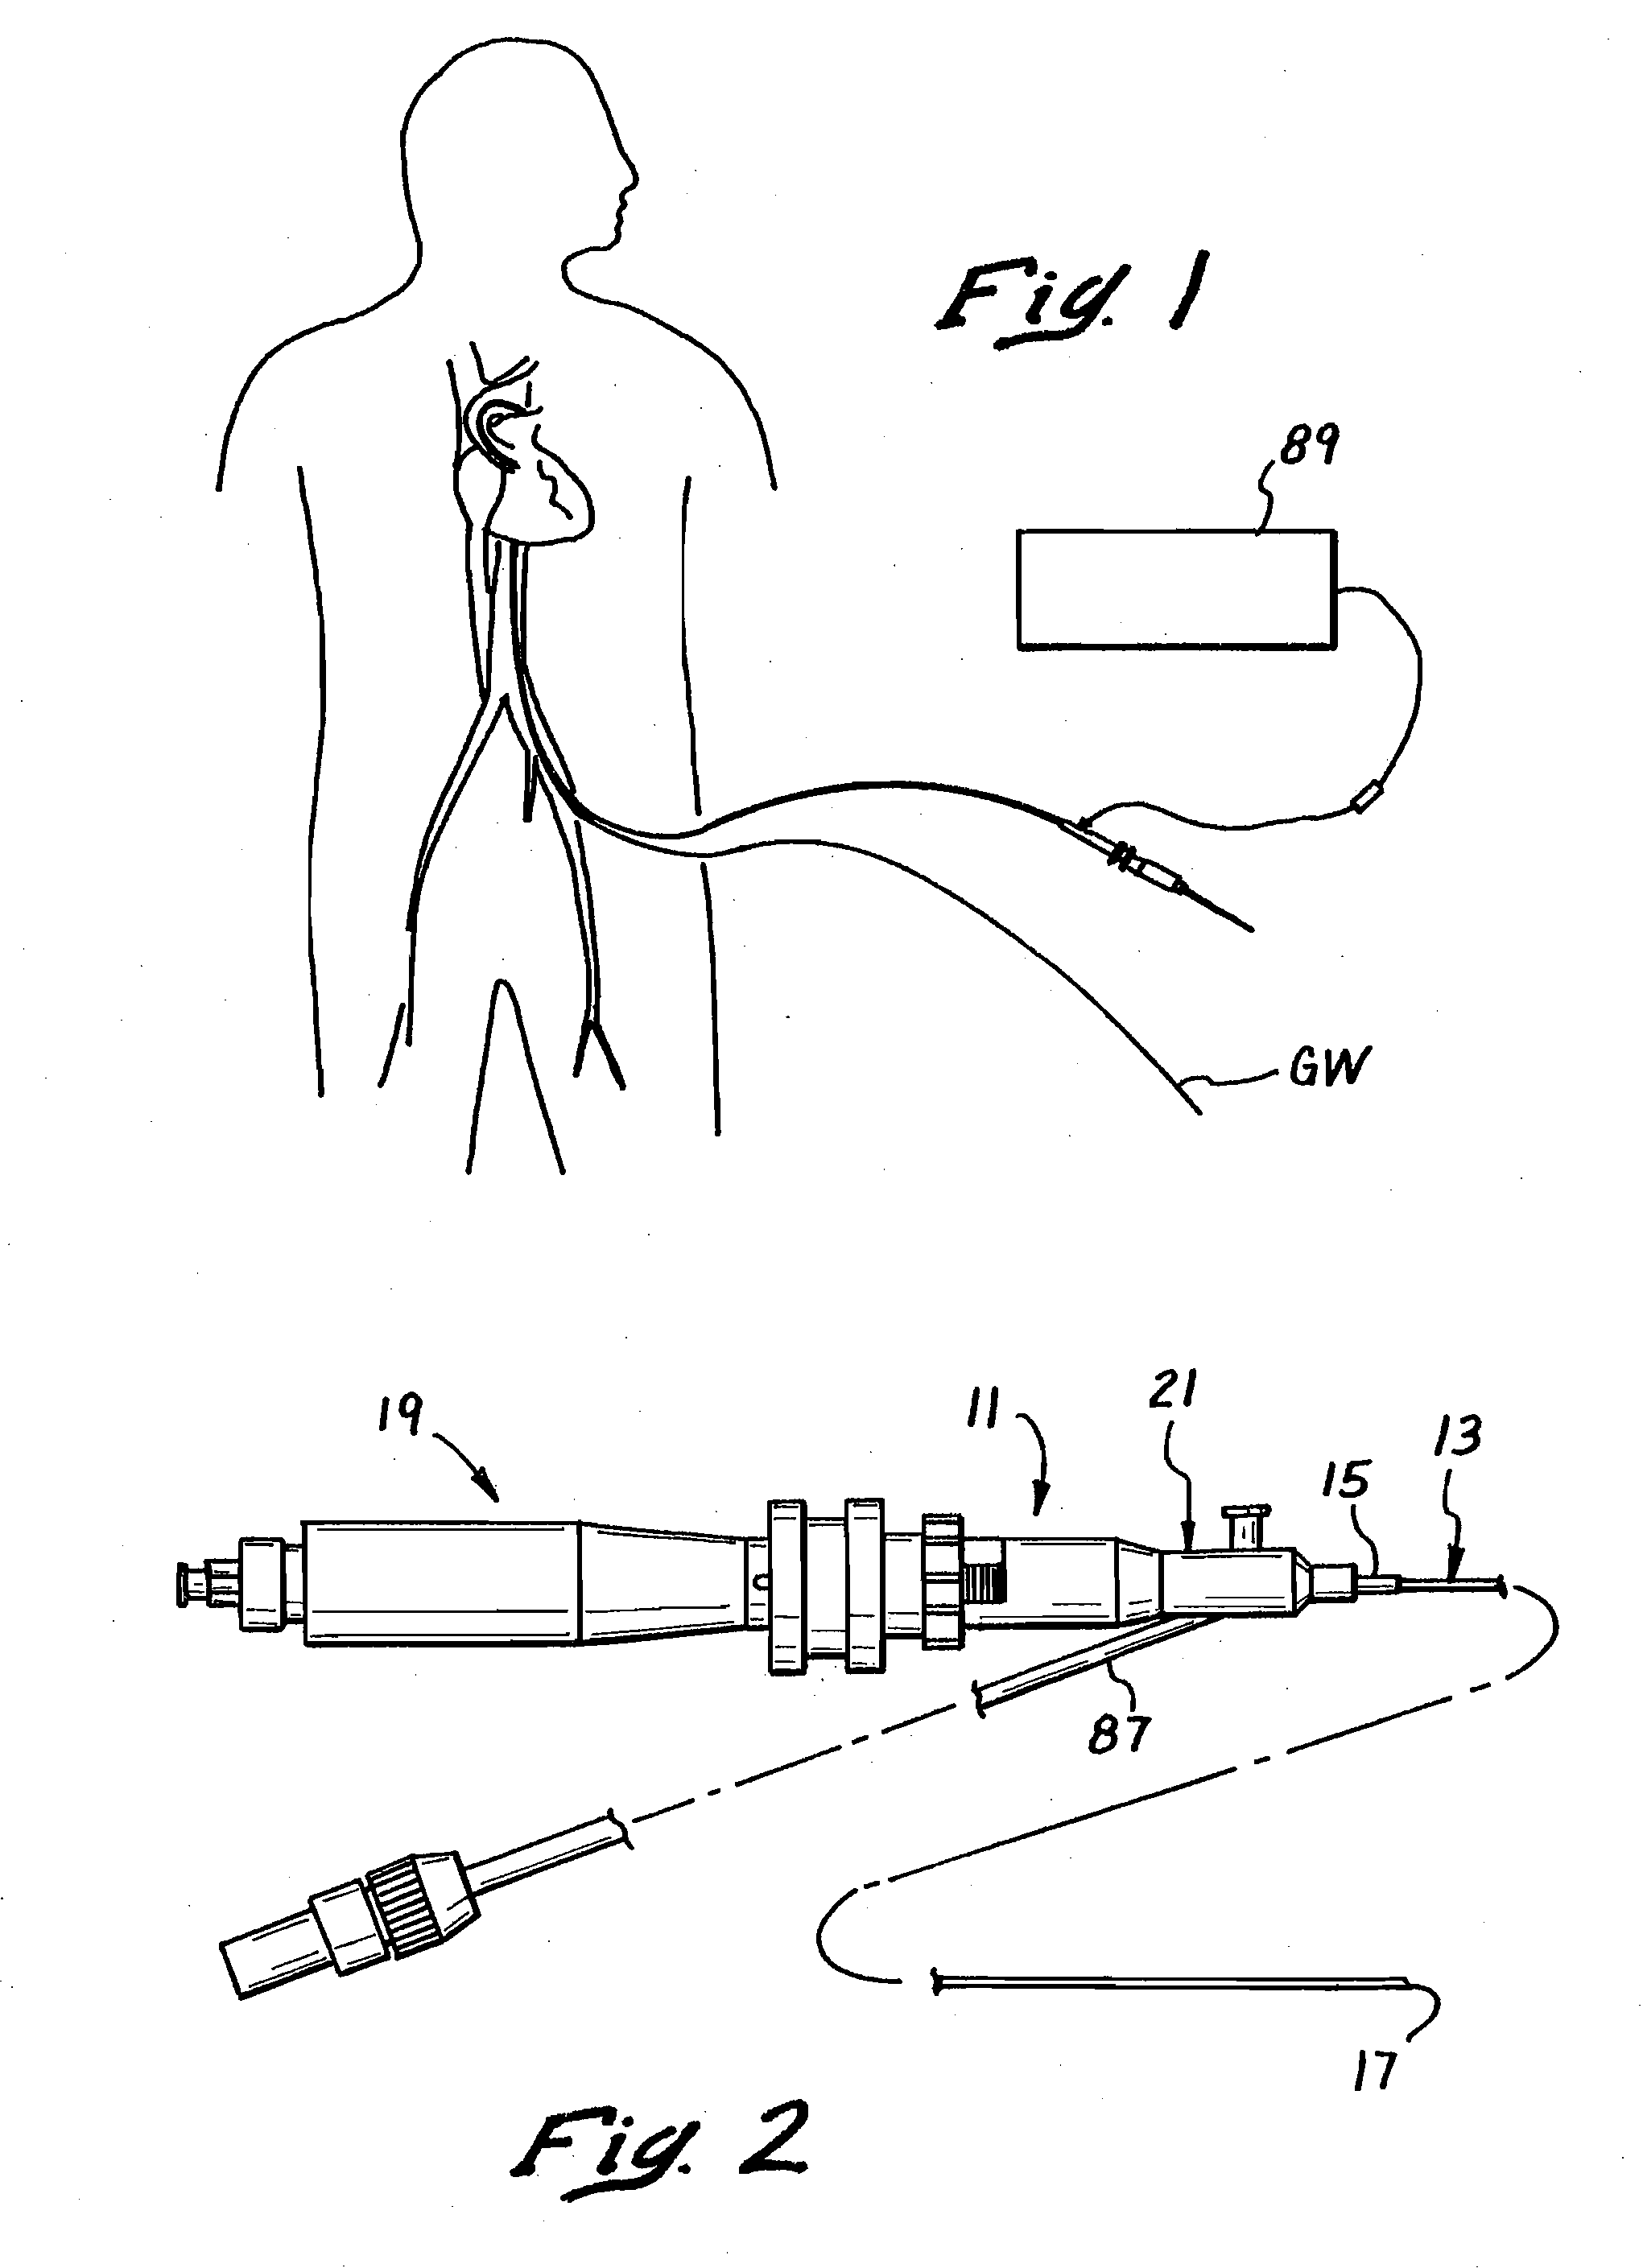 Tissue Penetrating Catheters having Integral Imaging Transducers and Their Methods of Use